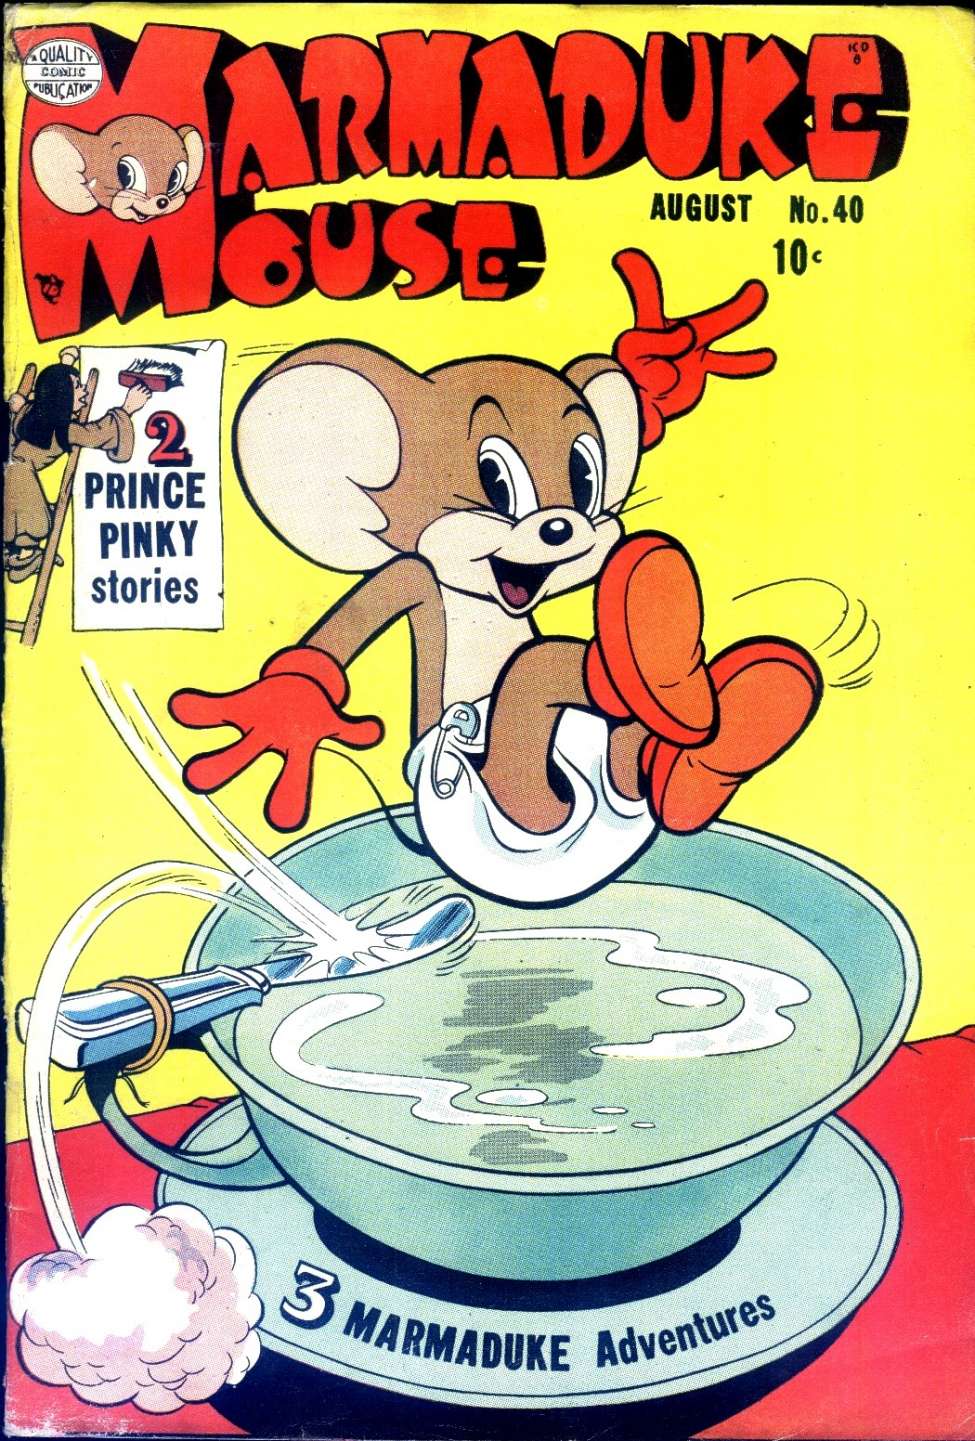 Book Cover For Marmaduke Mouse 40